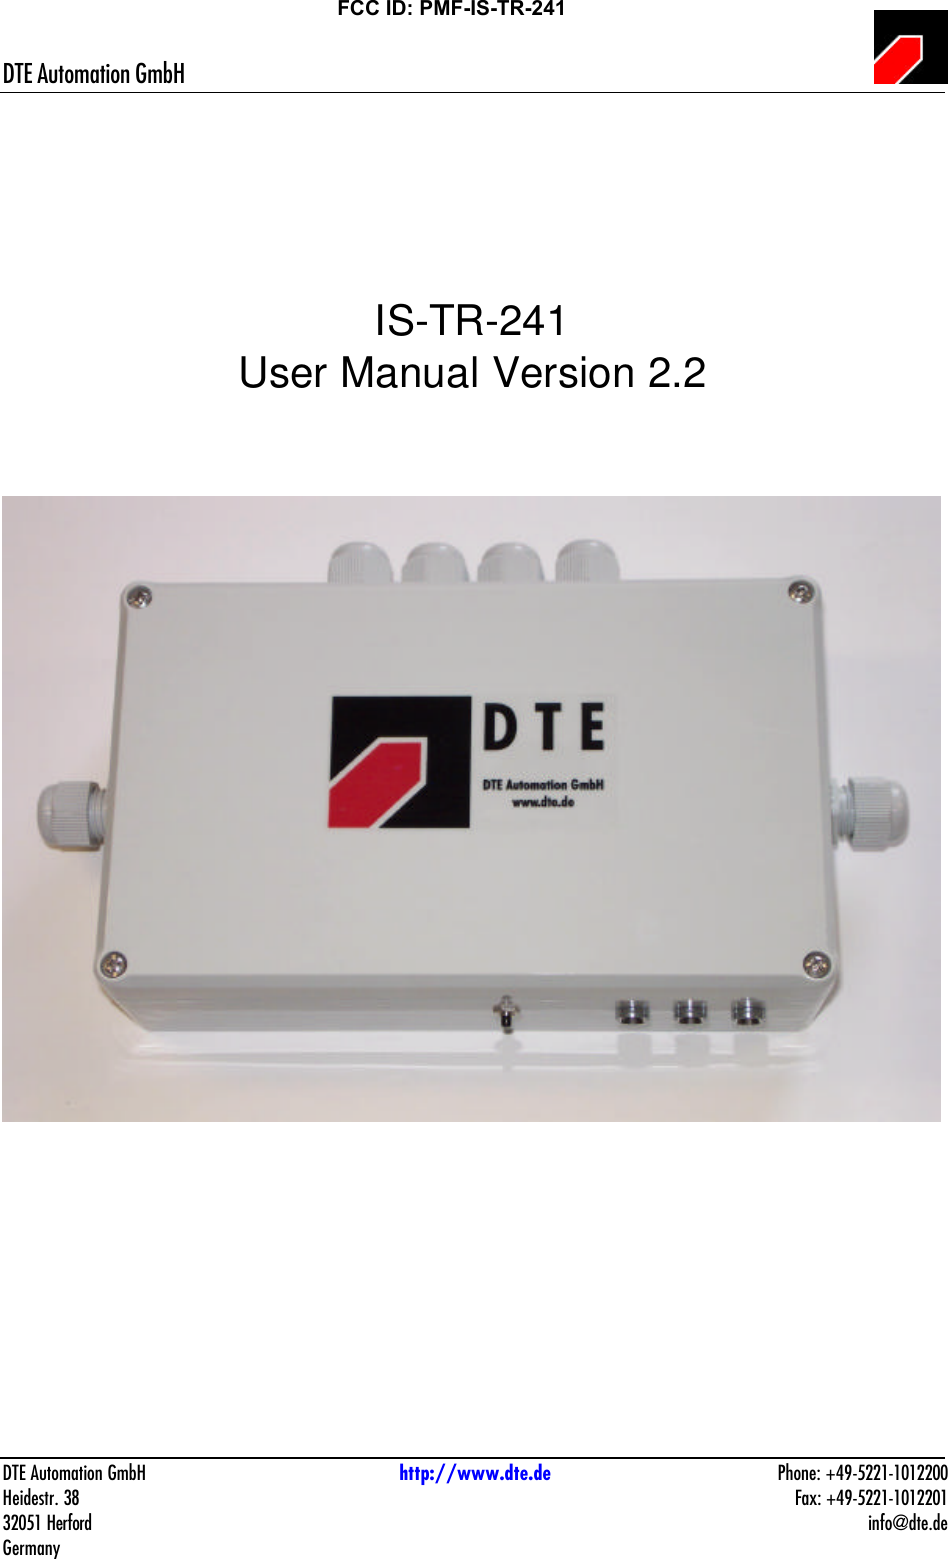 DTE Automation GmbH    DTE Automation GmbH http://www.dte.de Phone: +49-5221-1012200 Heidestr. 38    Fax: +49-5221-1012201 32051 Herford    info@dte.de Germany       IS-TR-241 User Manual Version 2.2          FCC ID: PMF-IS-TR-241